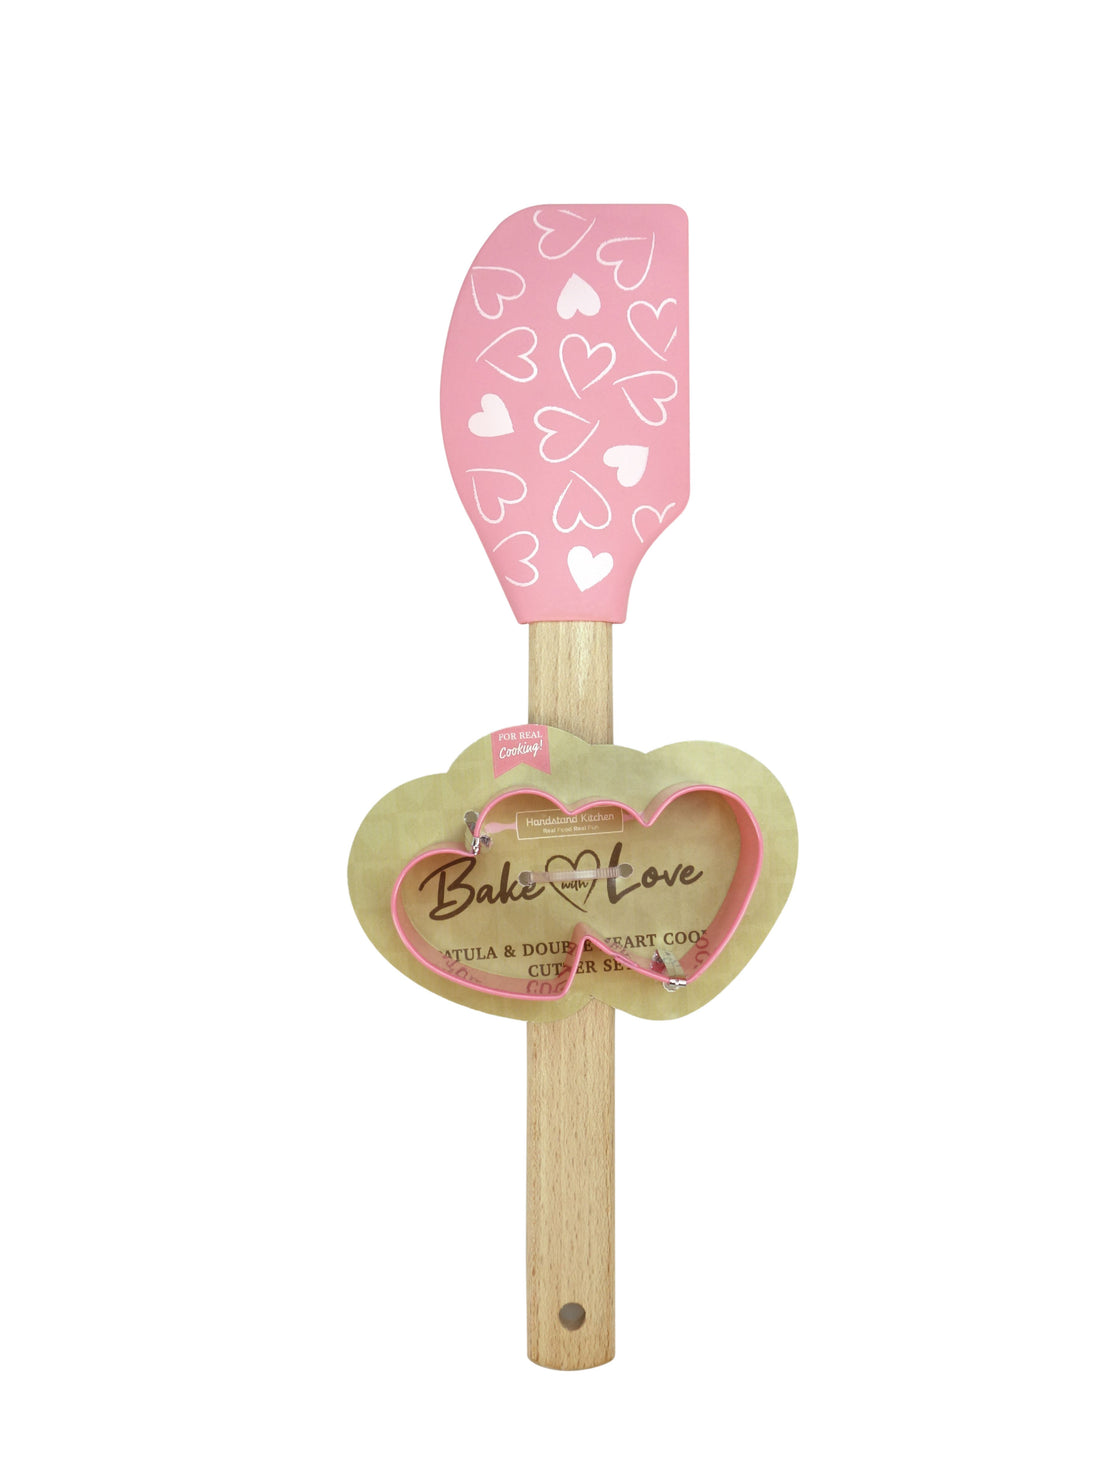 Bake With Love Spatula &amp; Double Heart Cookie Cutter Set